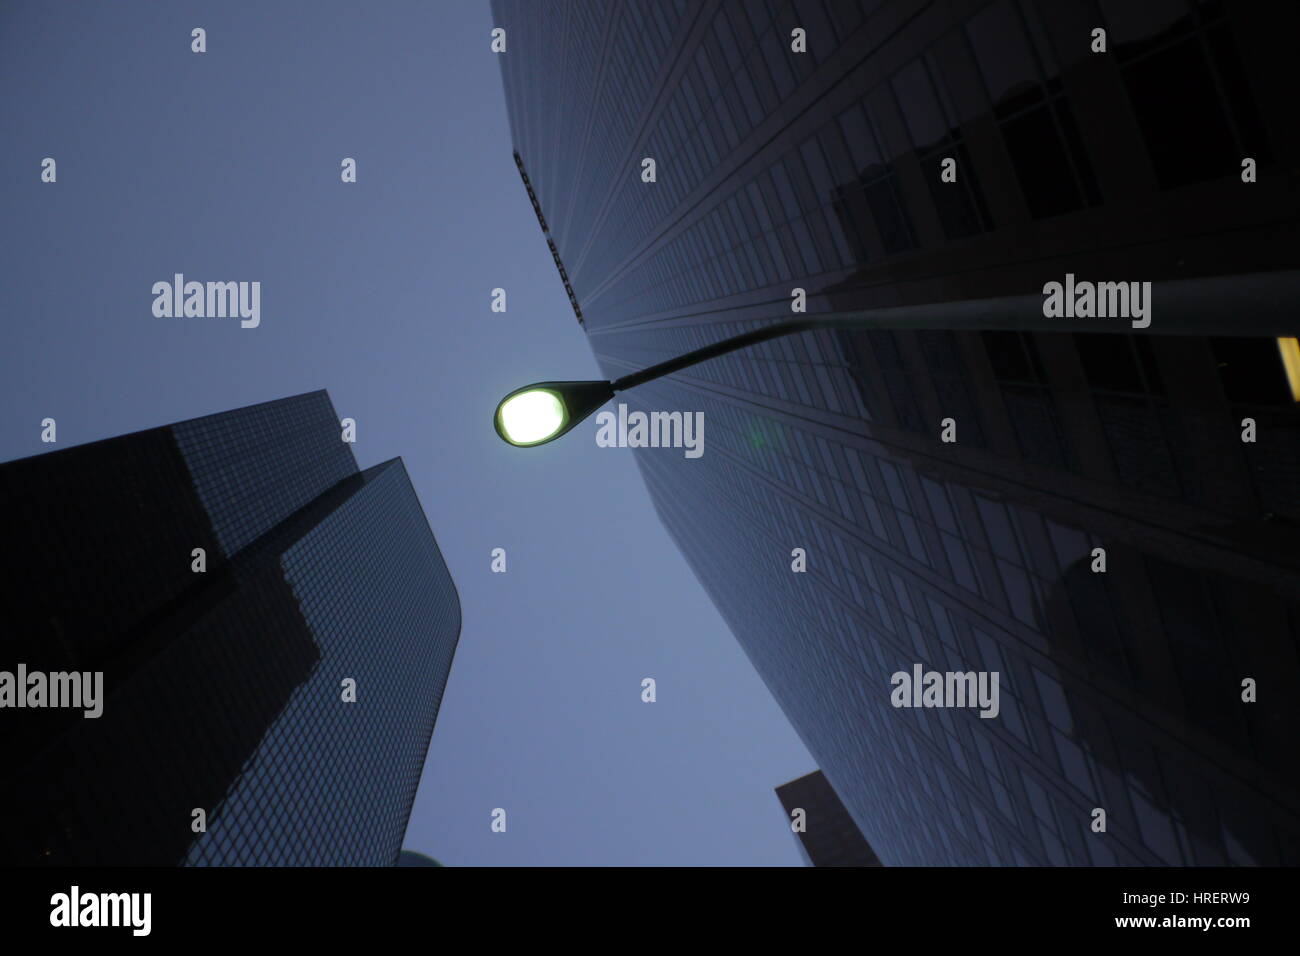 Street light in a financial district. Stock Photo